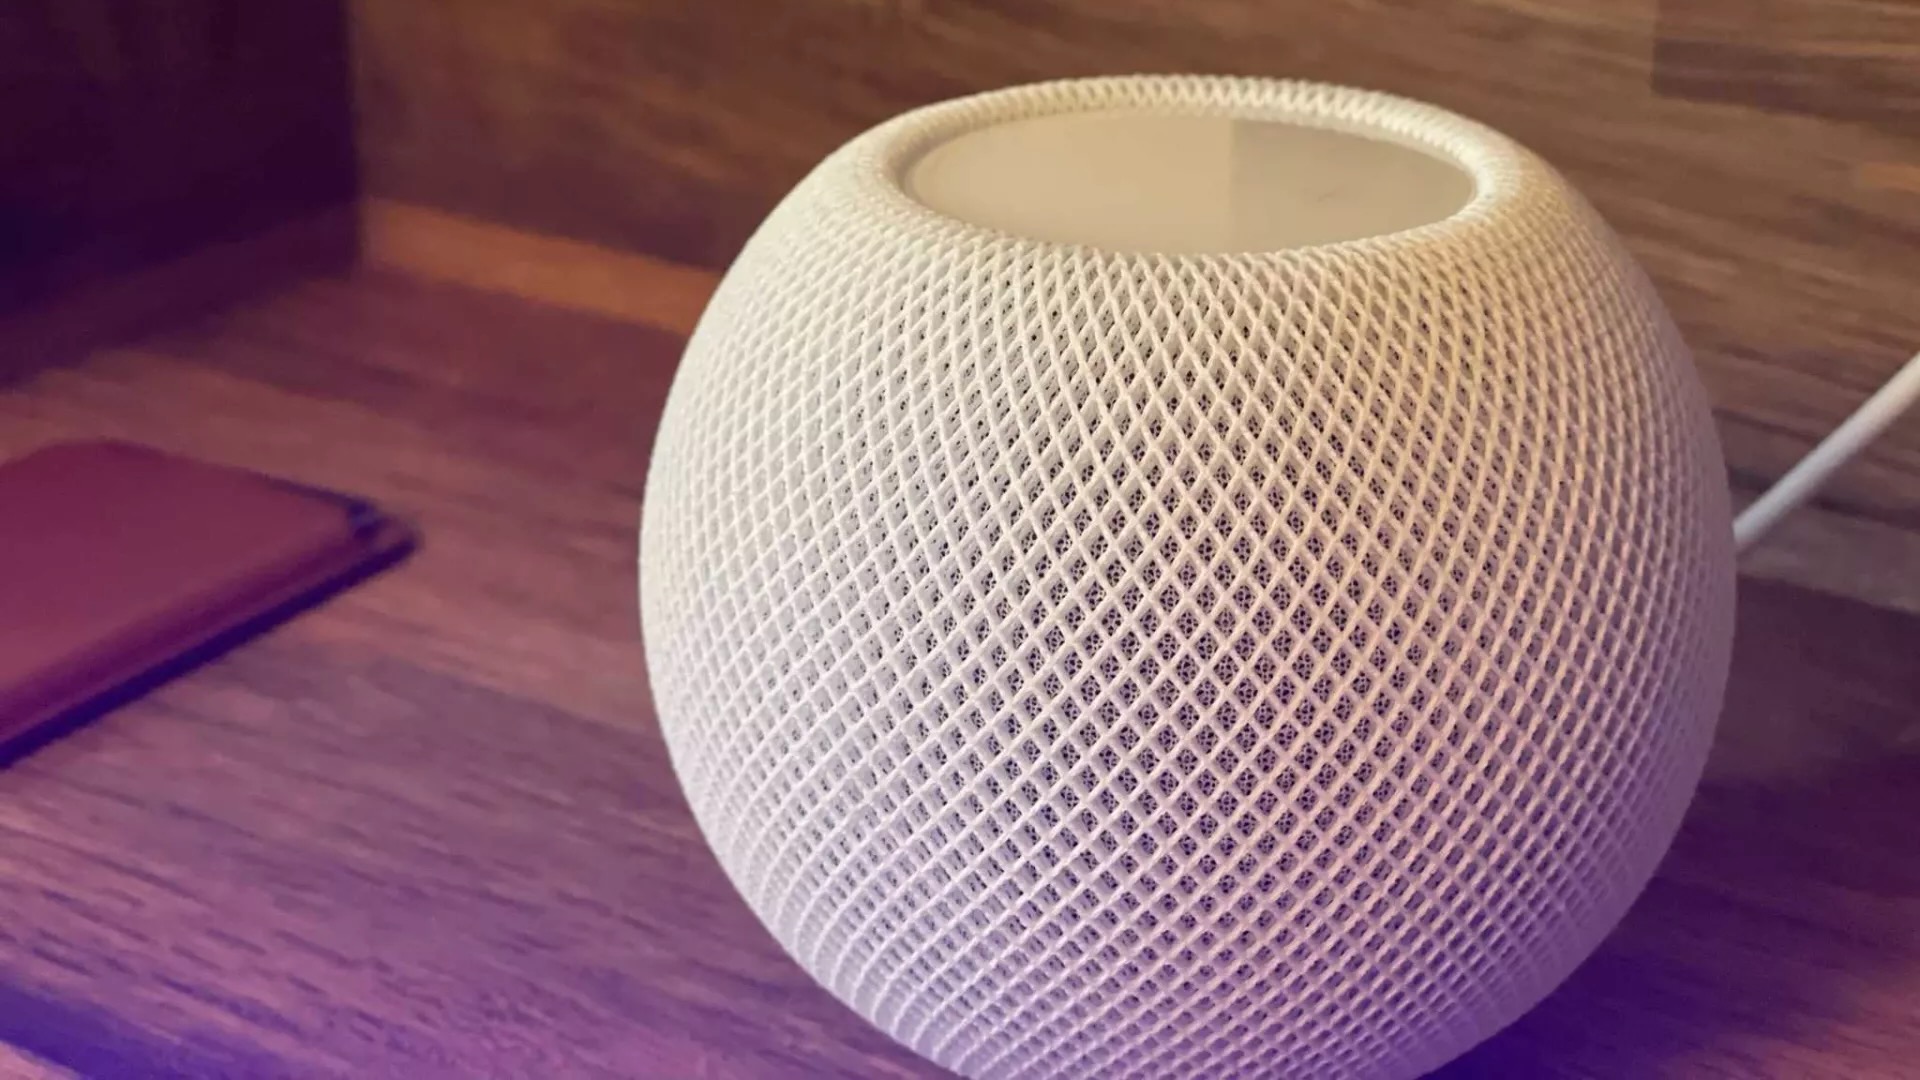 HomePod mini is now available in three more countries